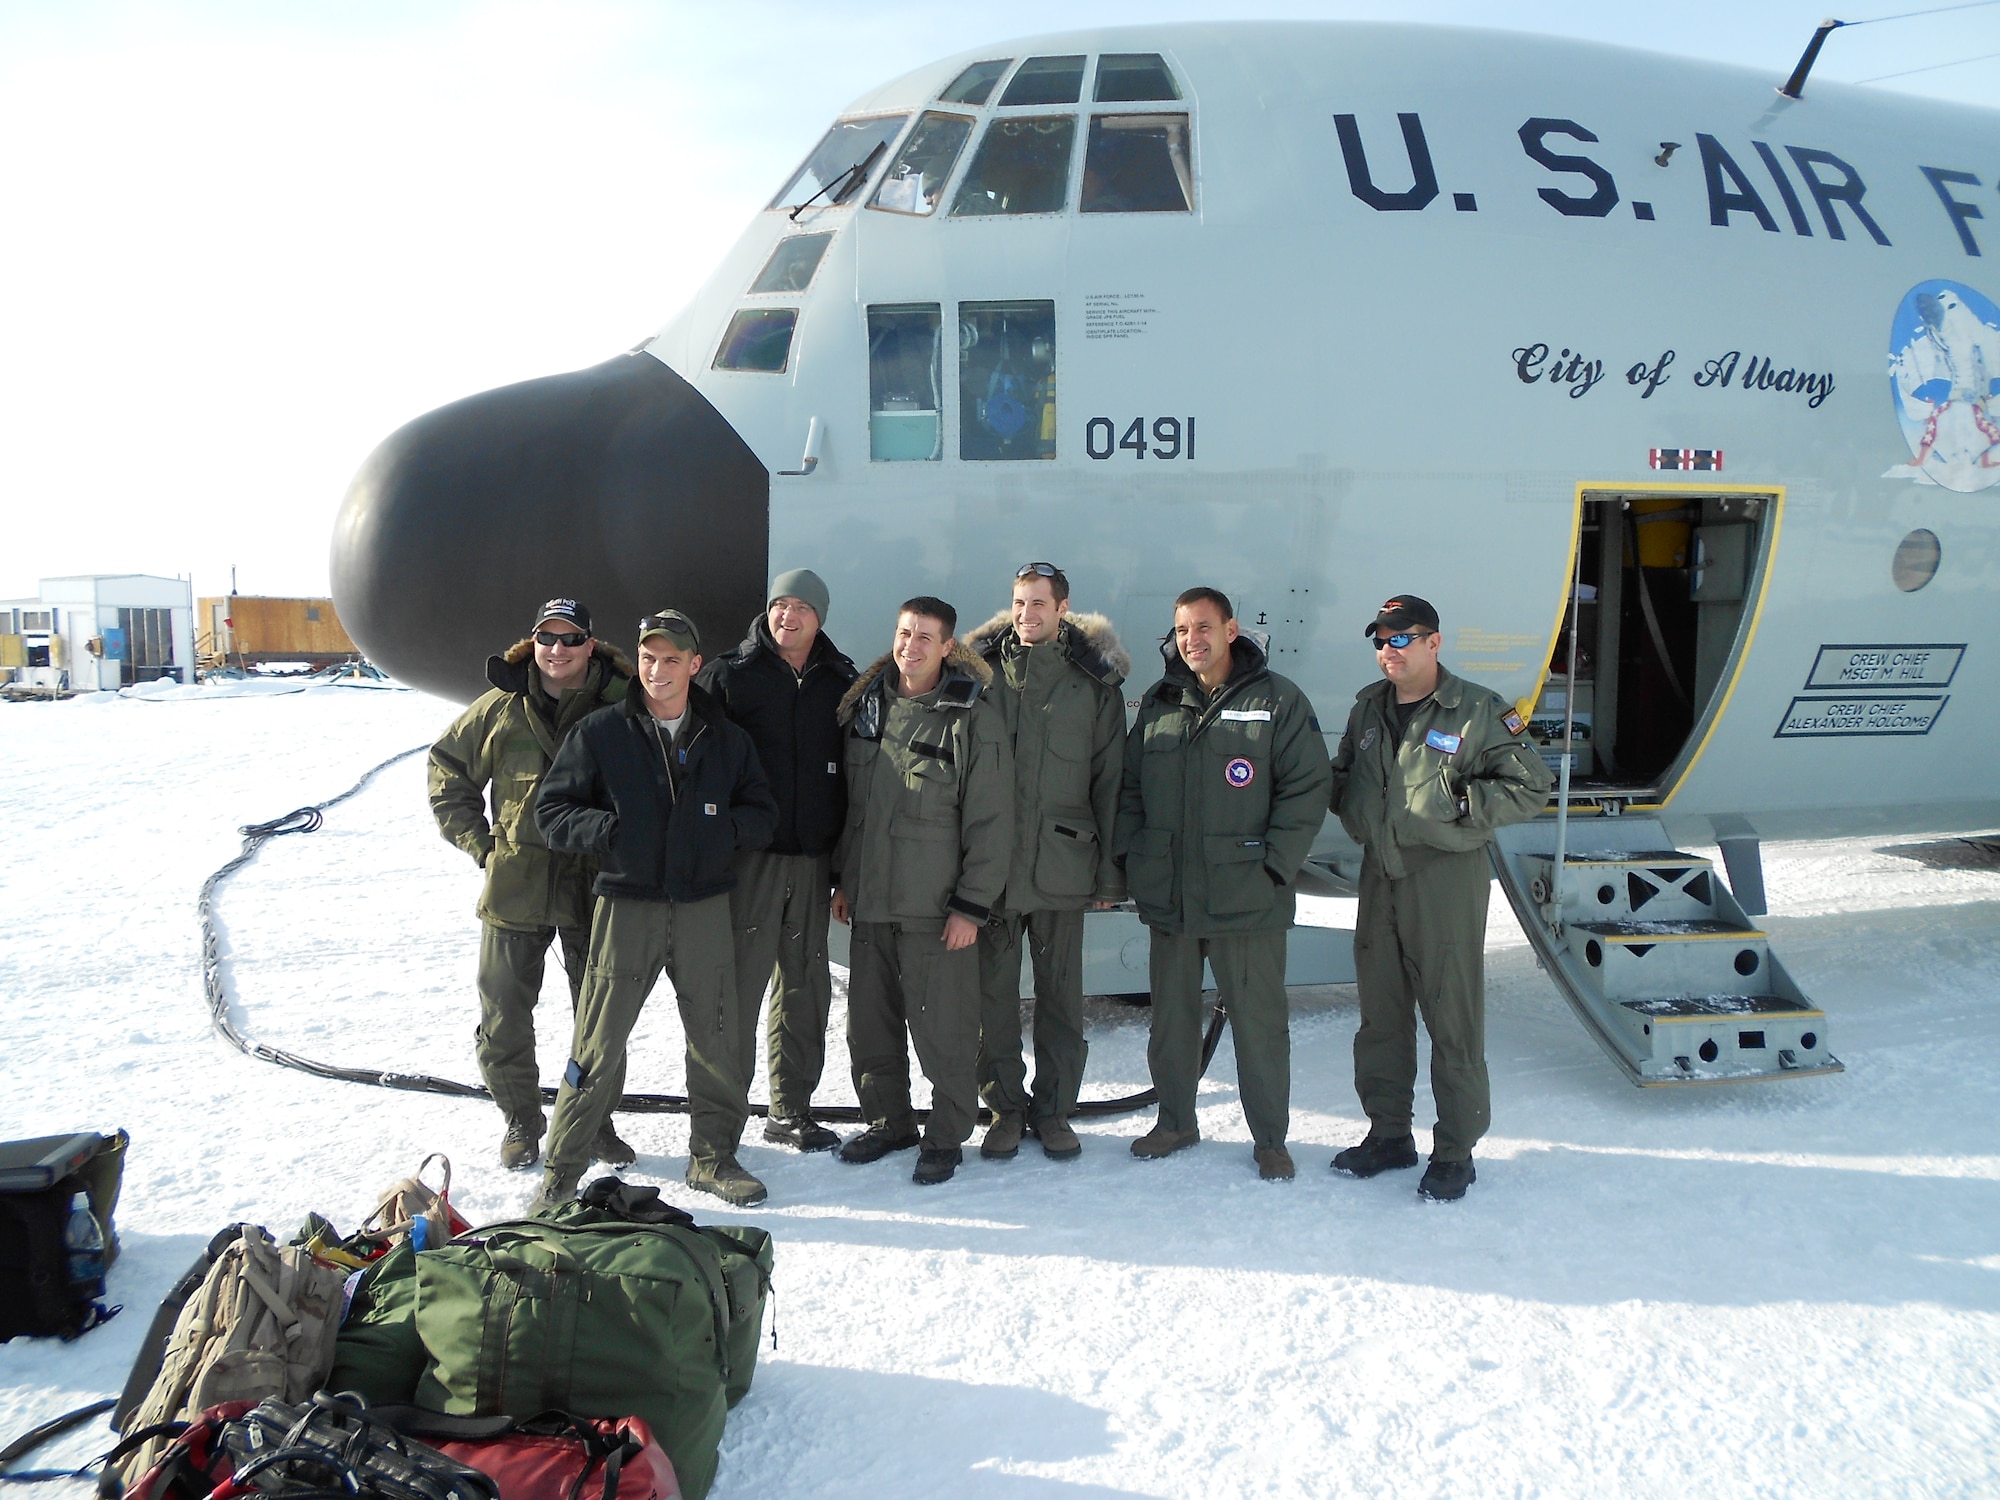 McMURDO STATION, Antarctica--Lt Gen Ted Kresge, Commander, Joint Task Force-Support Forces Antarctica (JTF-SFA), stands with the crew from Skier 21 after returning from at re-supply mission to the South Pole on November 22.  JTF-SFA, through Operation Deep Freeze, provides support to the National Science Foundation, which manages the United States Antarctic Program.